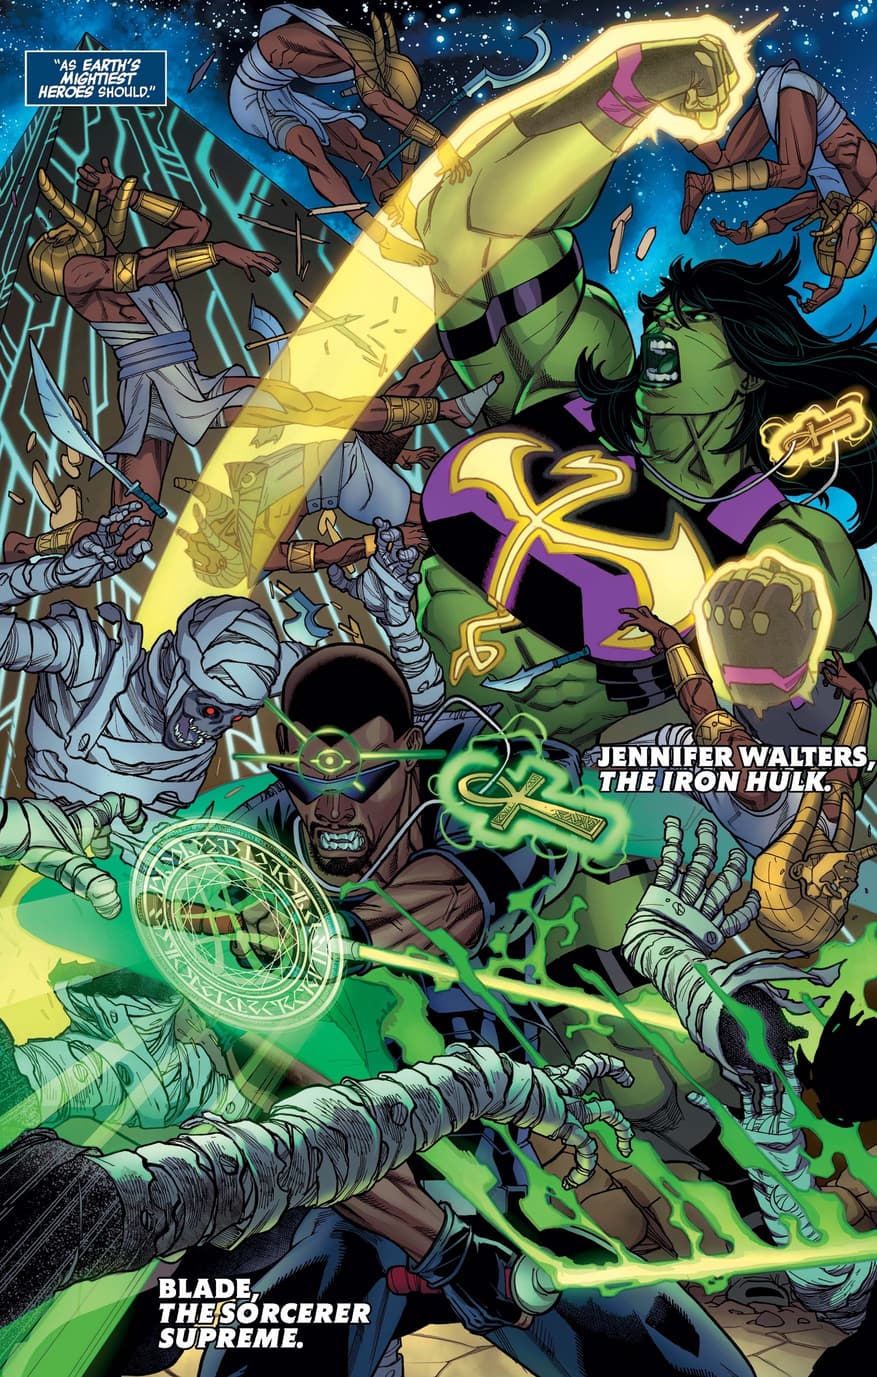 Blade as the Sorcerer Supreme with She-Hulk as Iron Fist.